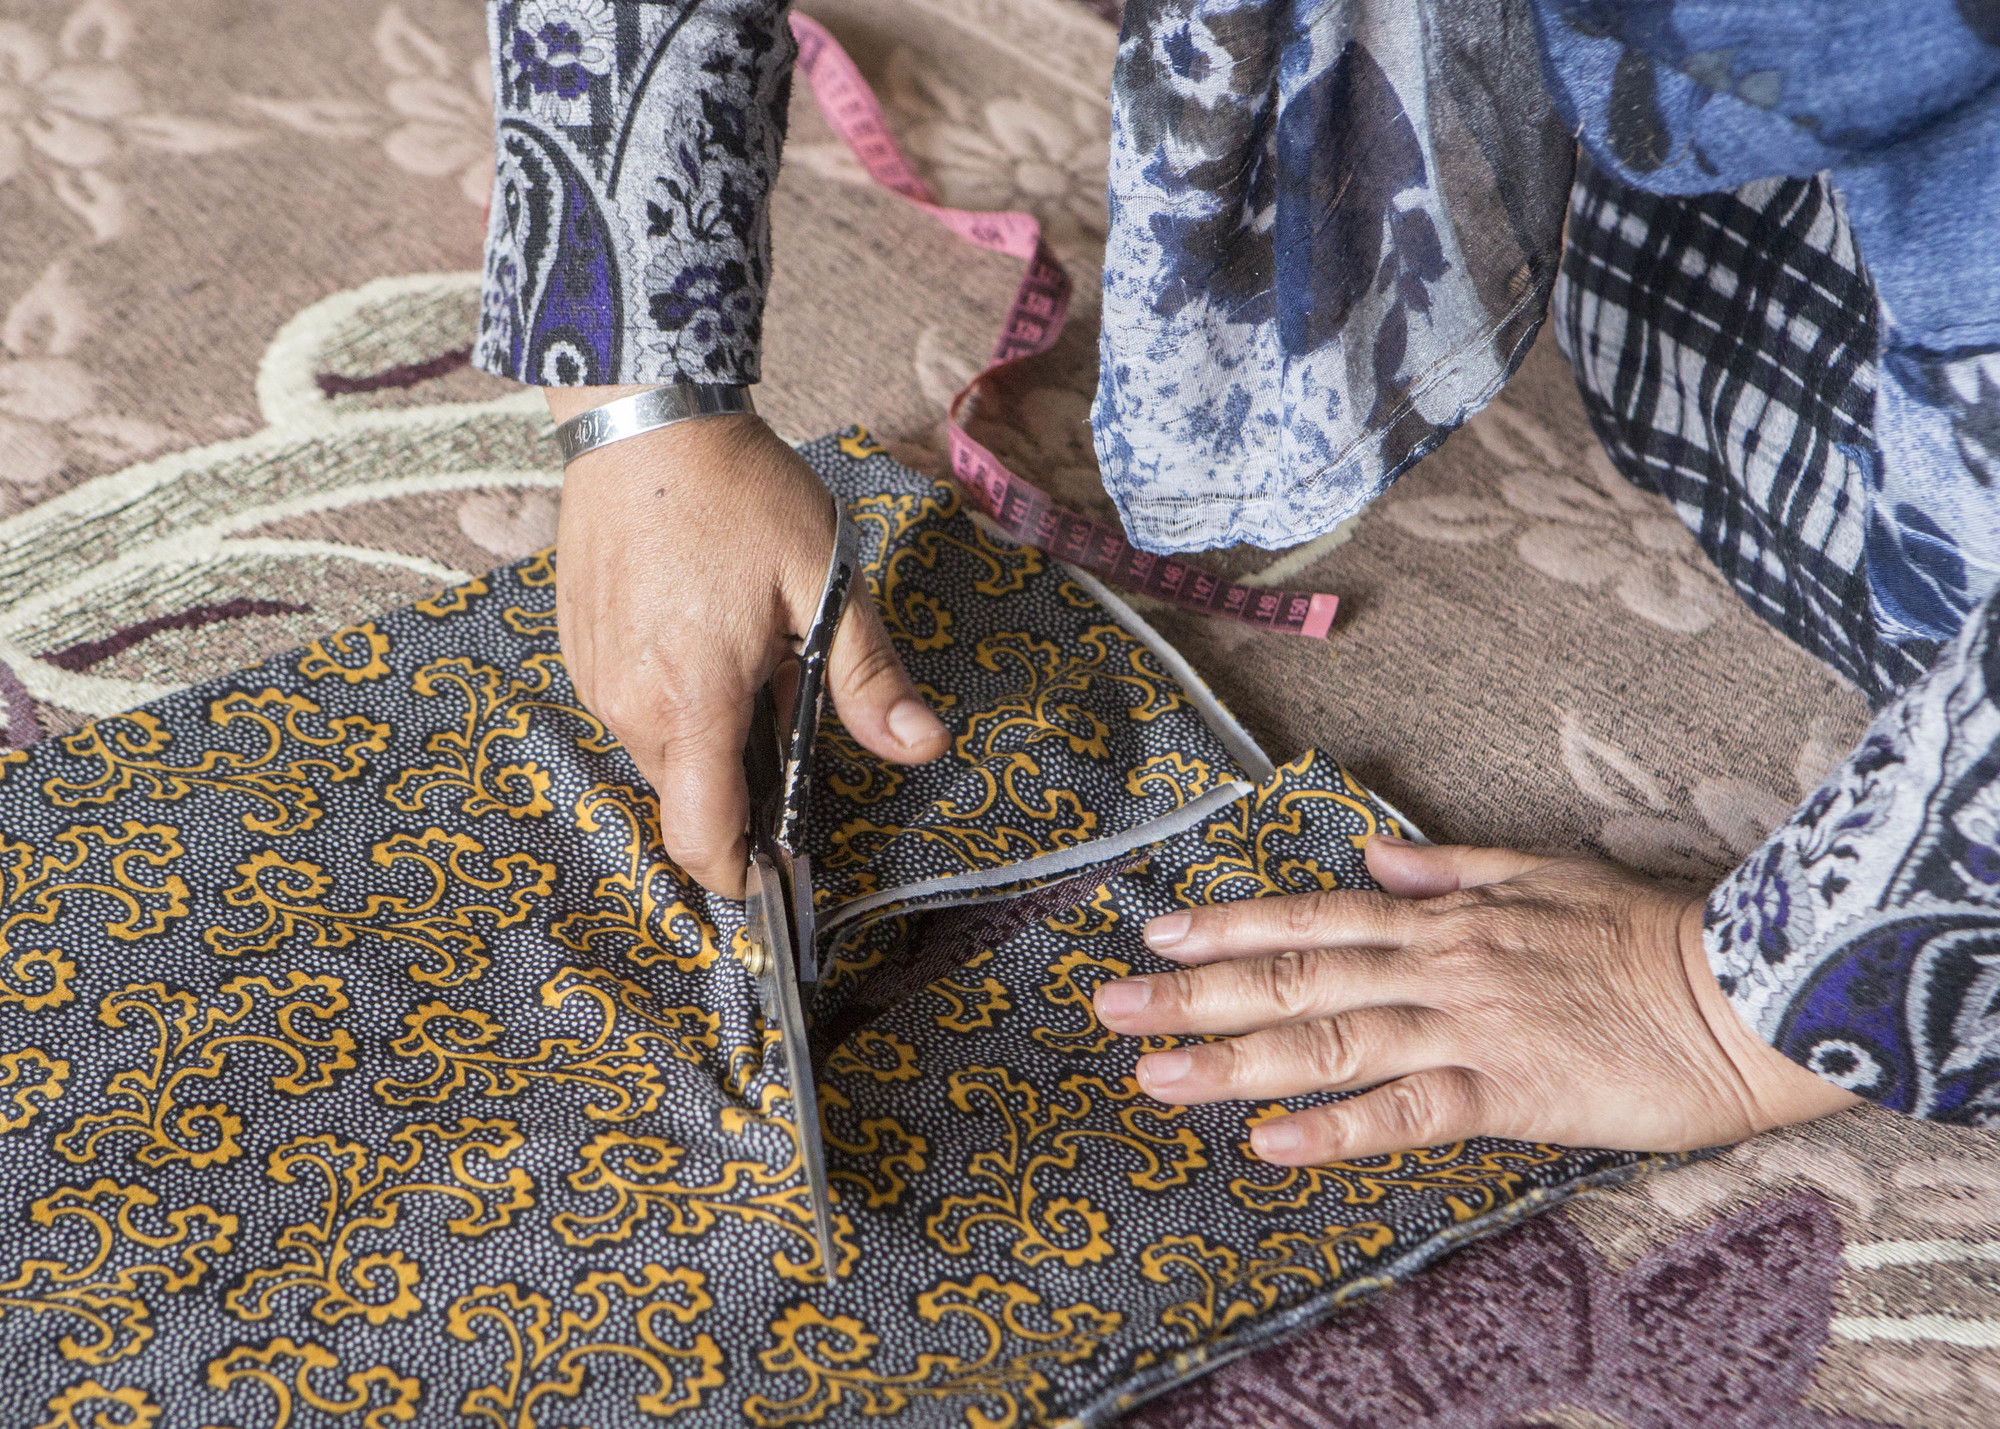 Shireen sewing a dress. Photo: Alison Baskerville